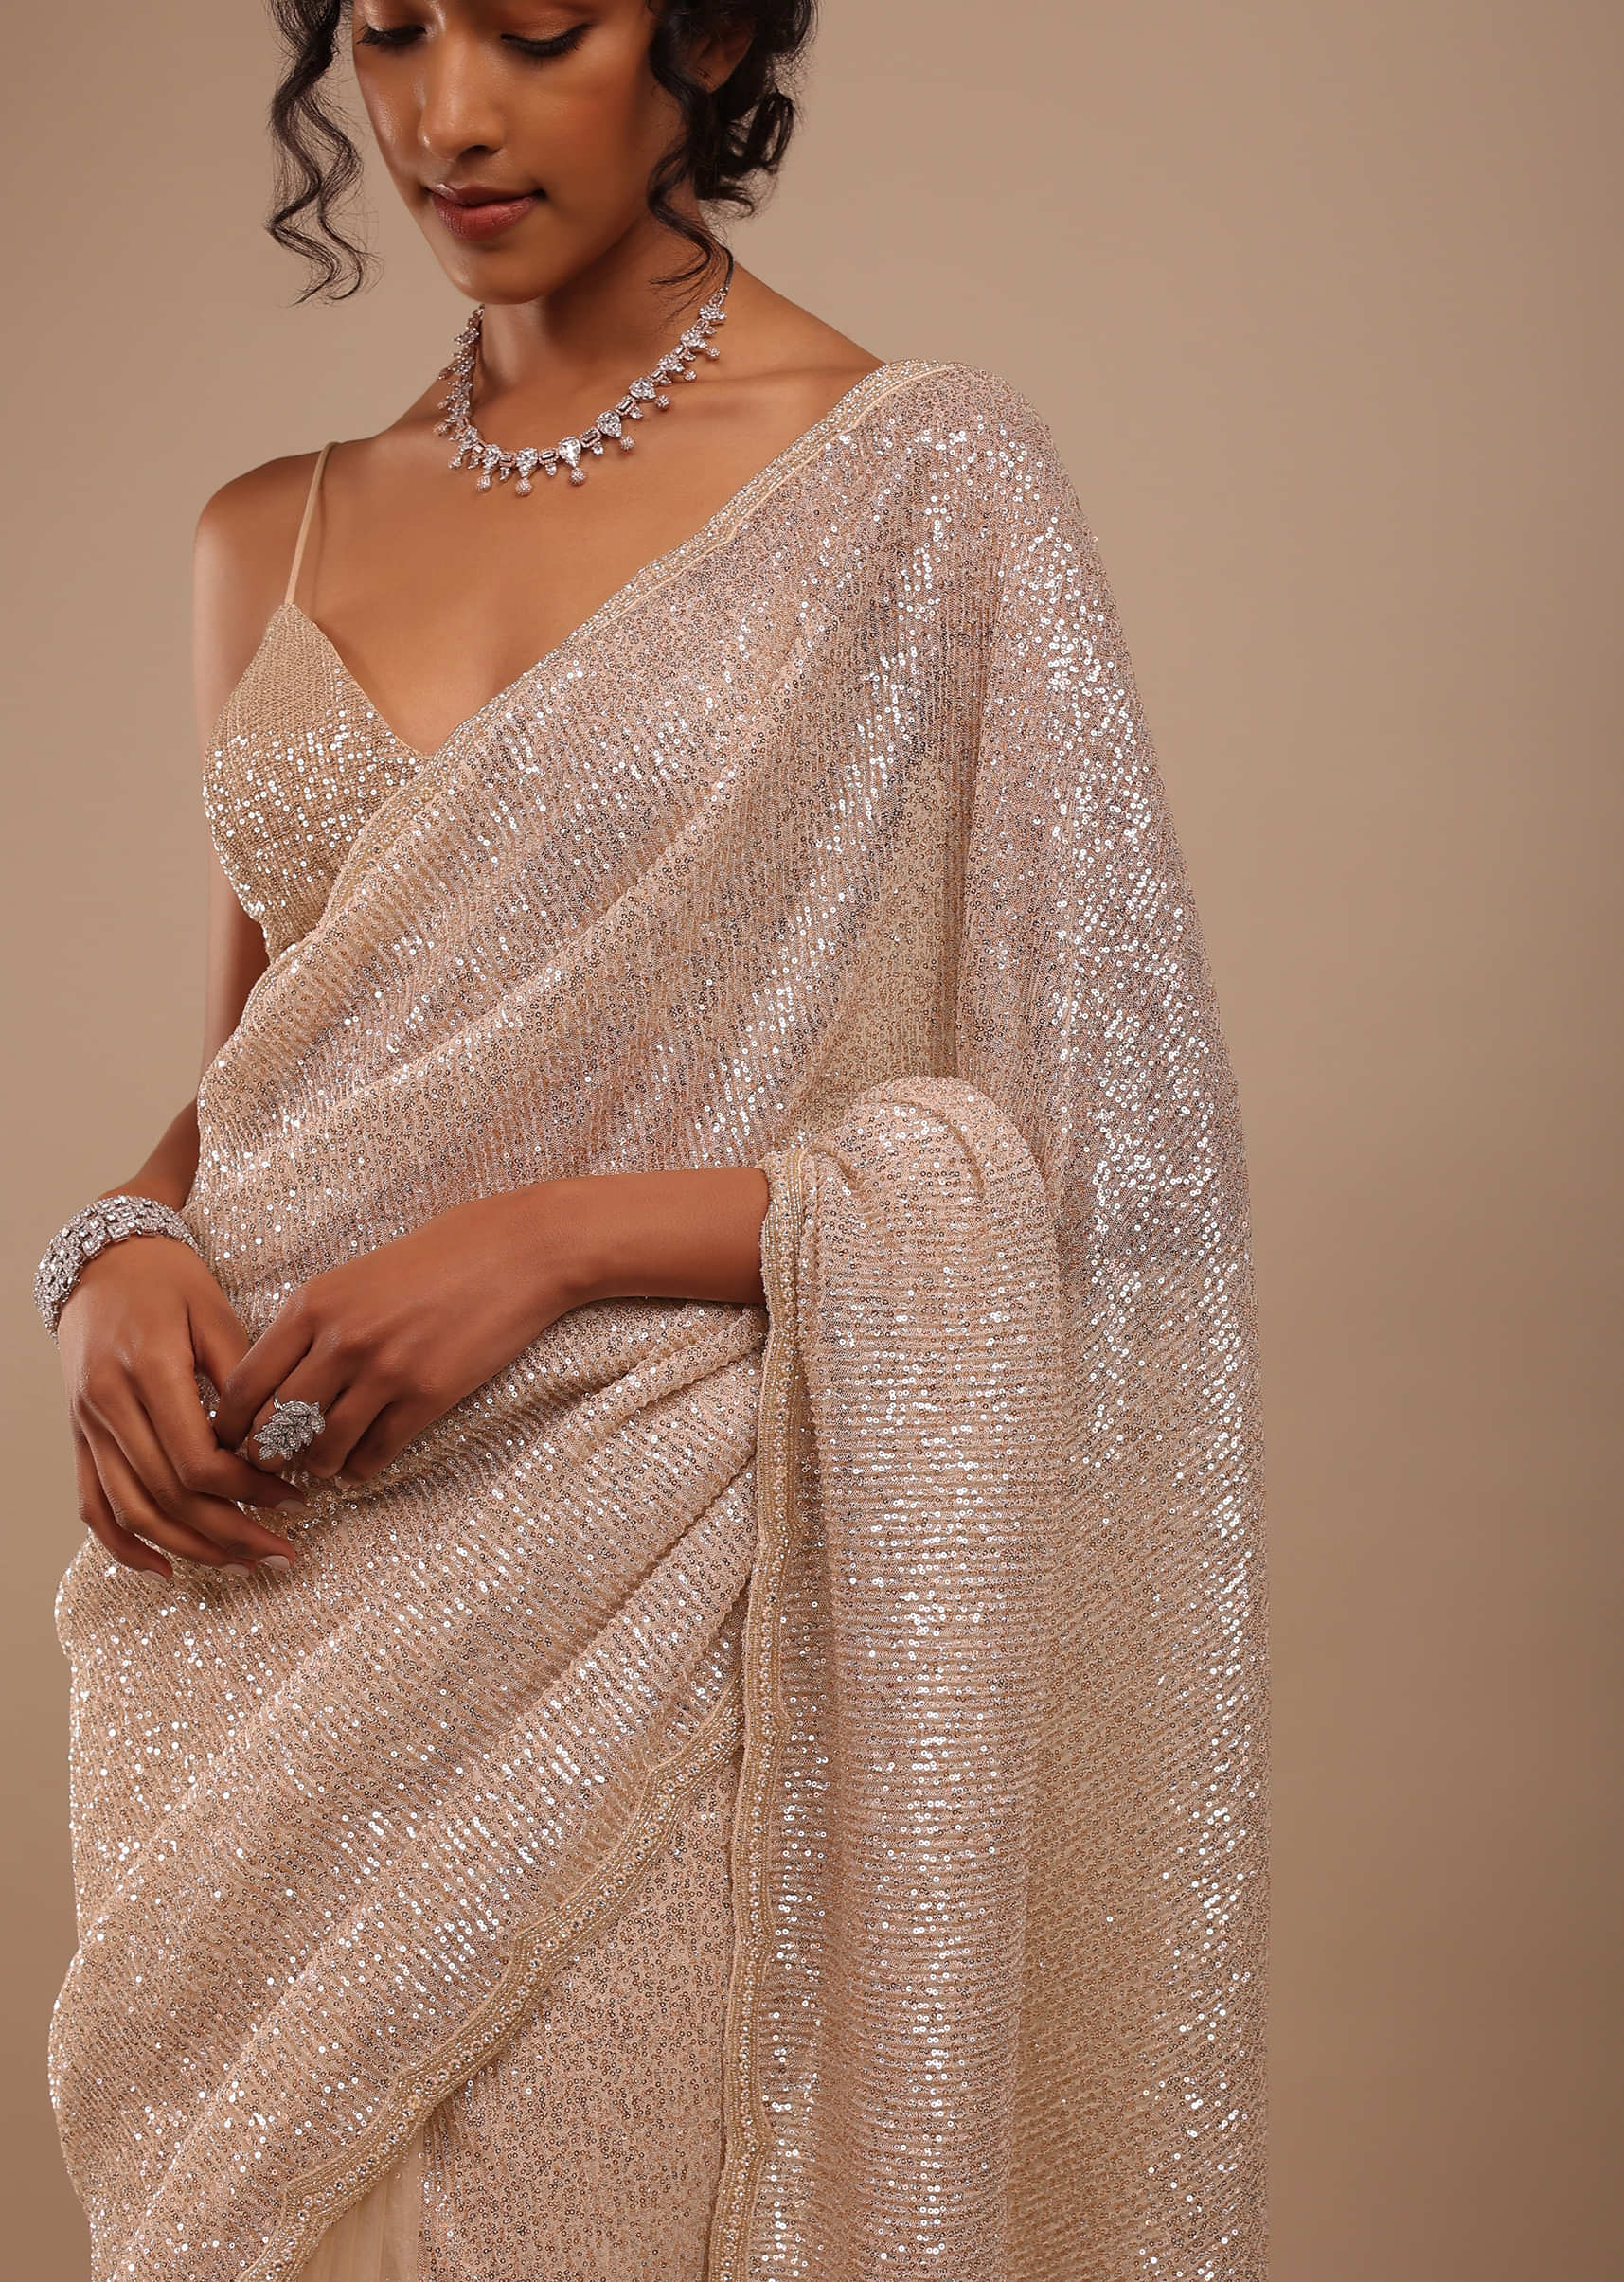 Peach Shimmer Saree In Gold Sequins And Stones Embroidery With Beads And Stones On The Pallu Border